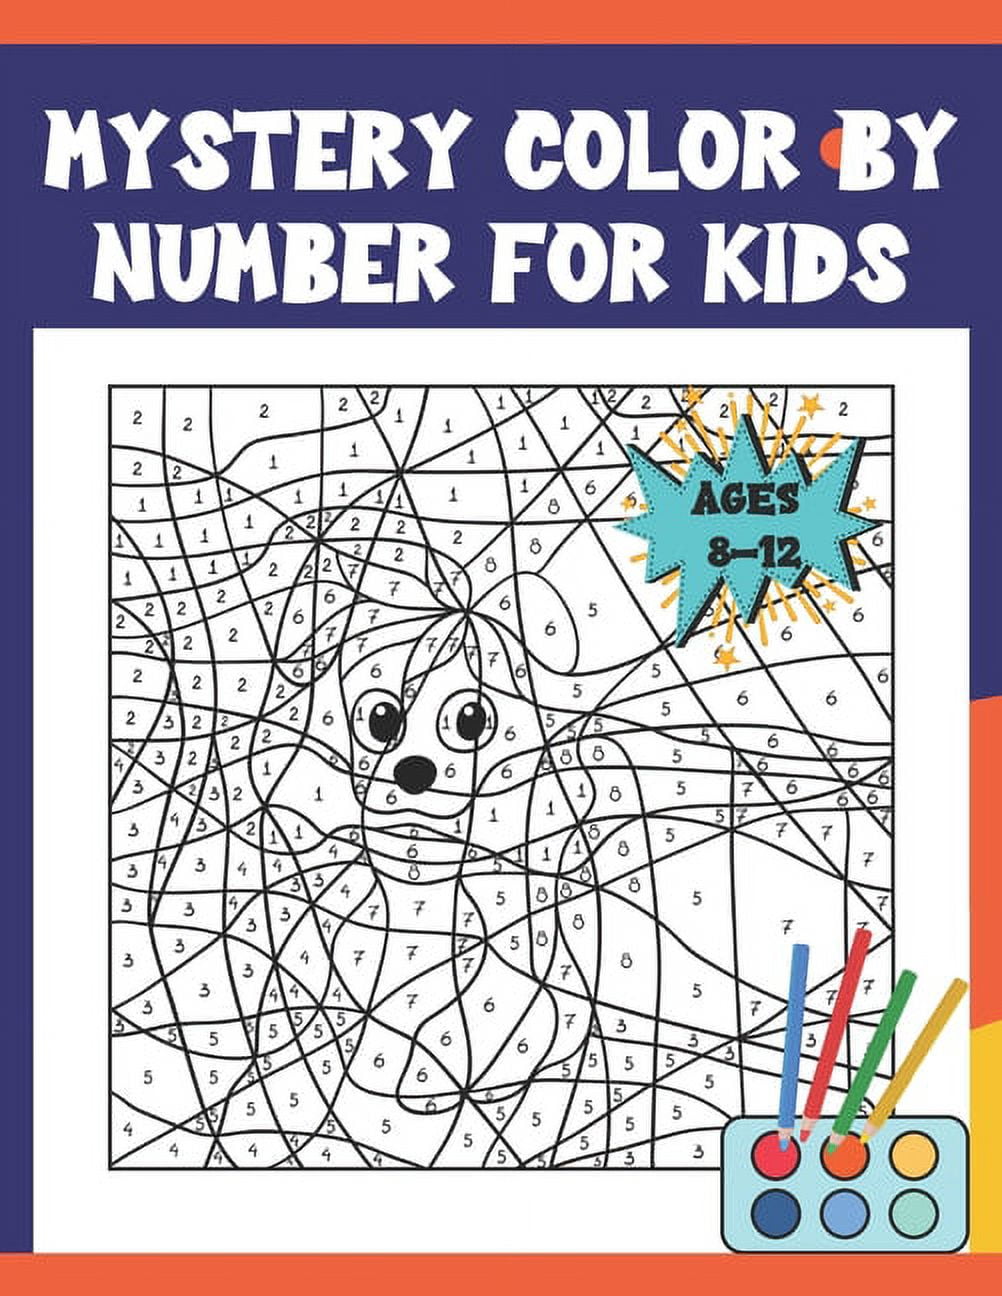 Color by Numbers Coloring Book for Kids Ages 8-12: Perfect Color By Number  Coloring Book For Kids With Beautiful Design To Create Wonderful Art For Ki  (Paperback)